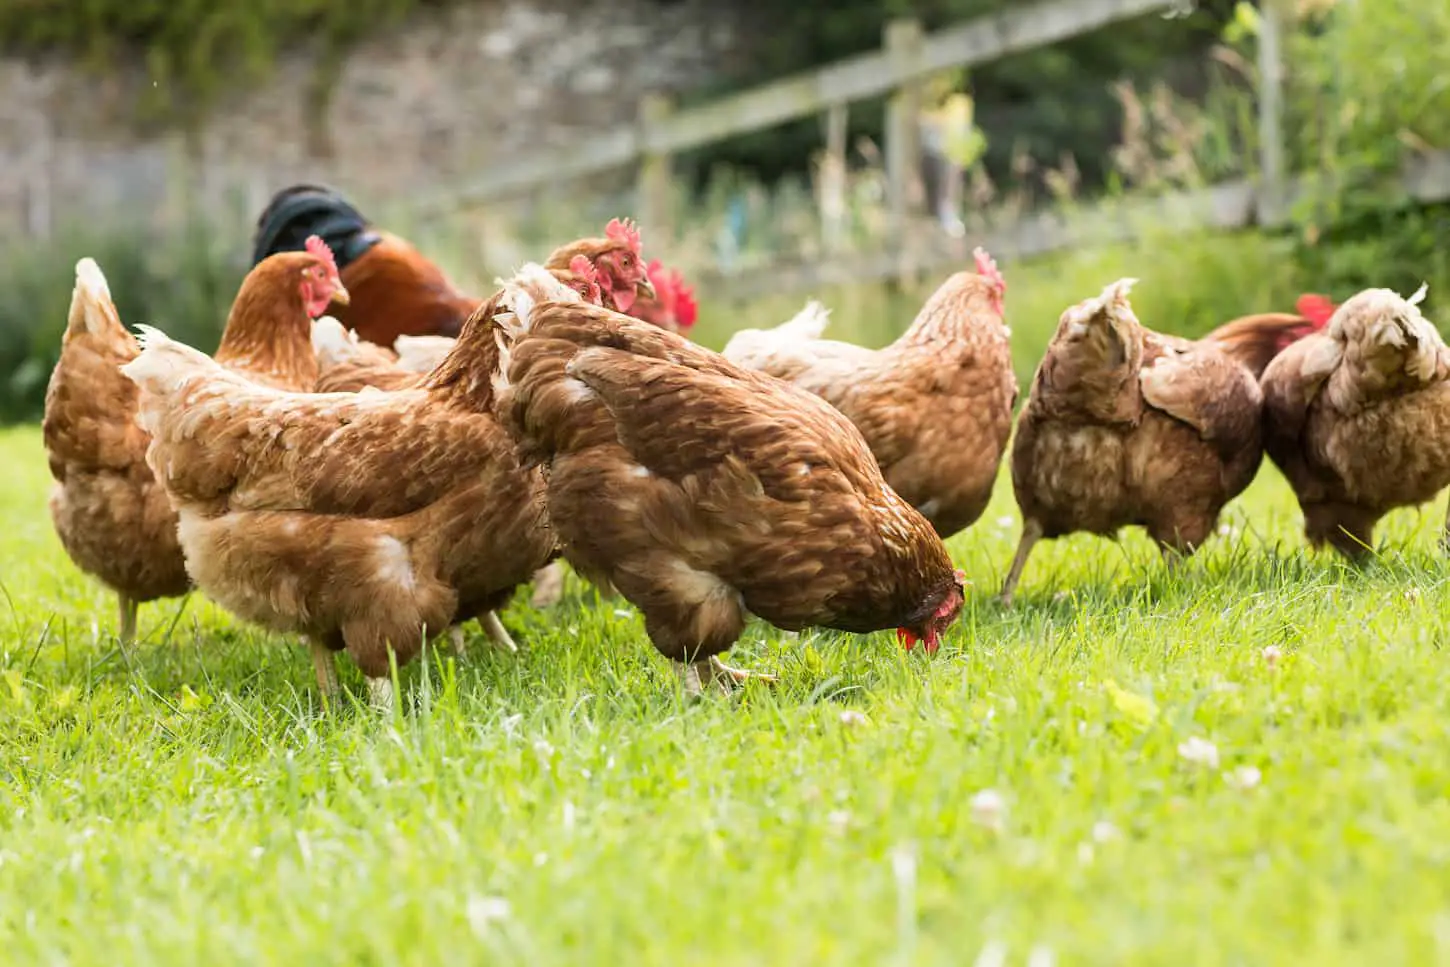 An image of free-ranging chickens on a lawn pecking the ground.